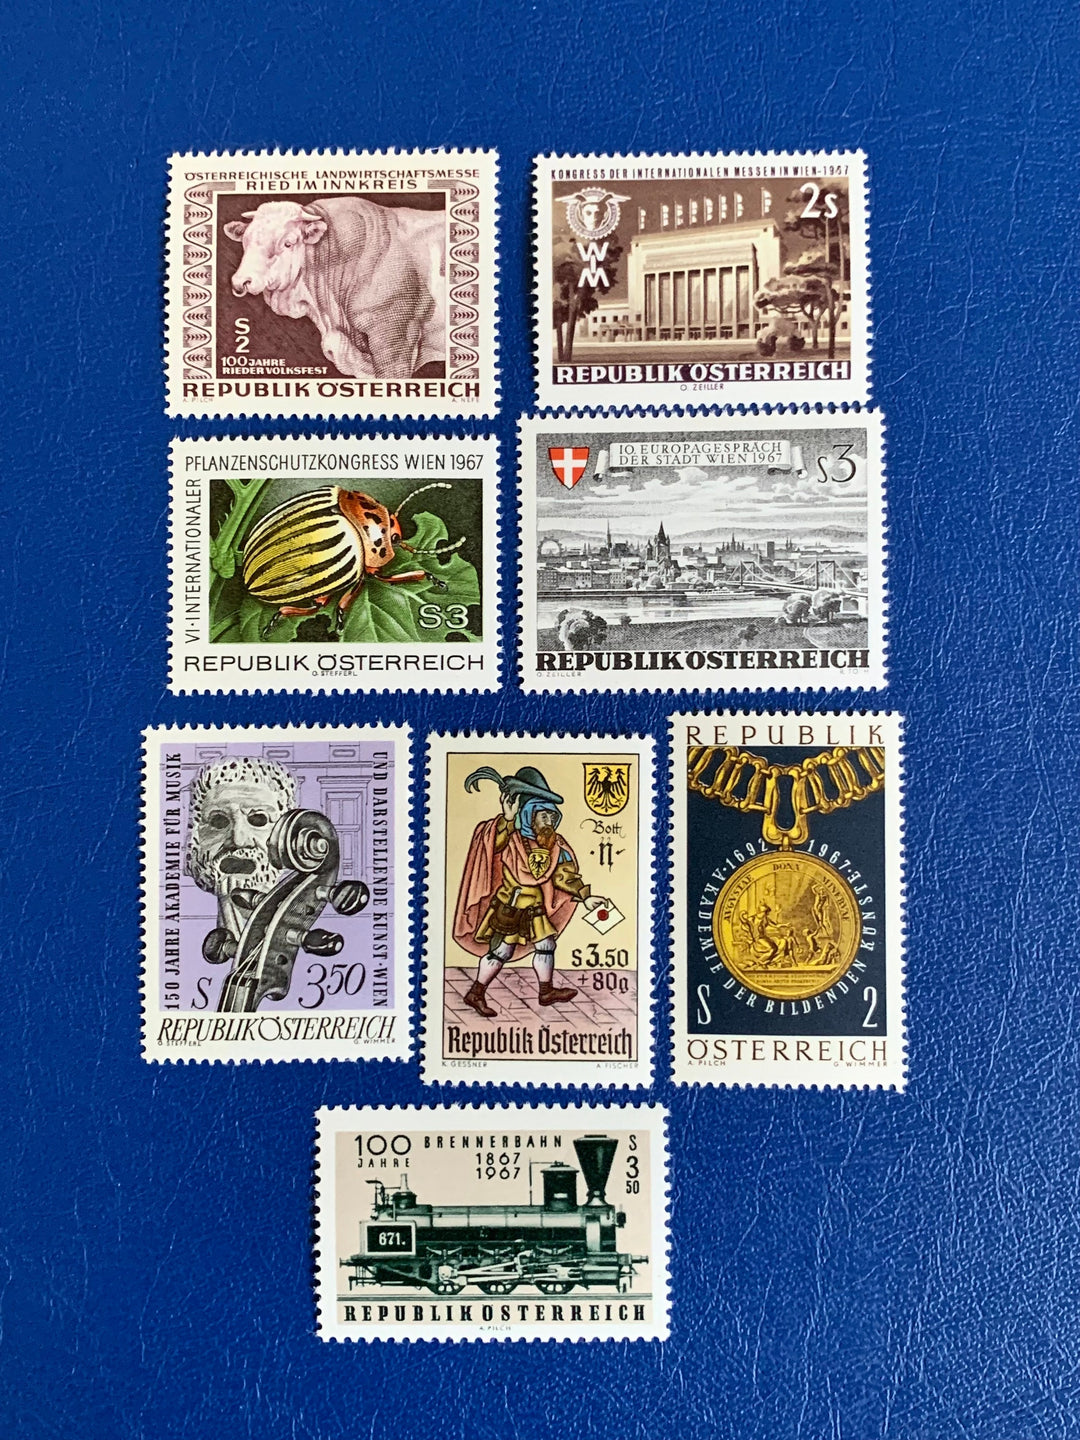 Austria - Original Vintage Postage Stamps - 1967 Mix - for the collector, artist or crafter - scrapbooks, decoupage